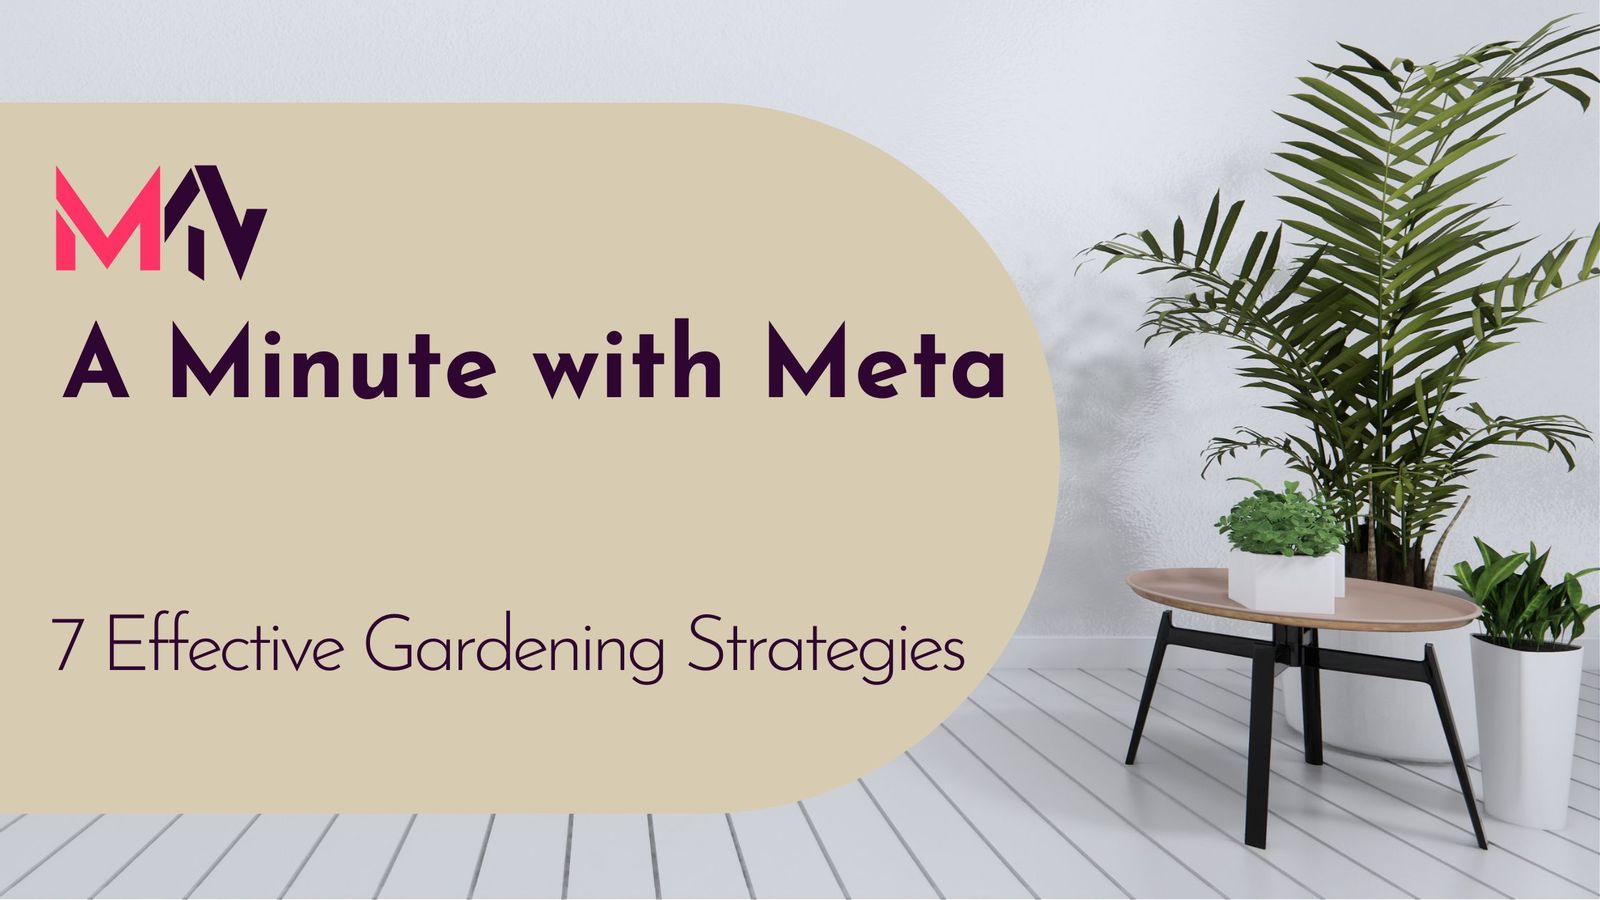 A Minute with Meta: 7 Effective Gardening Strategies